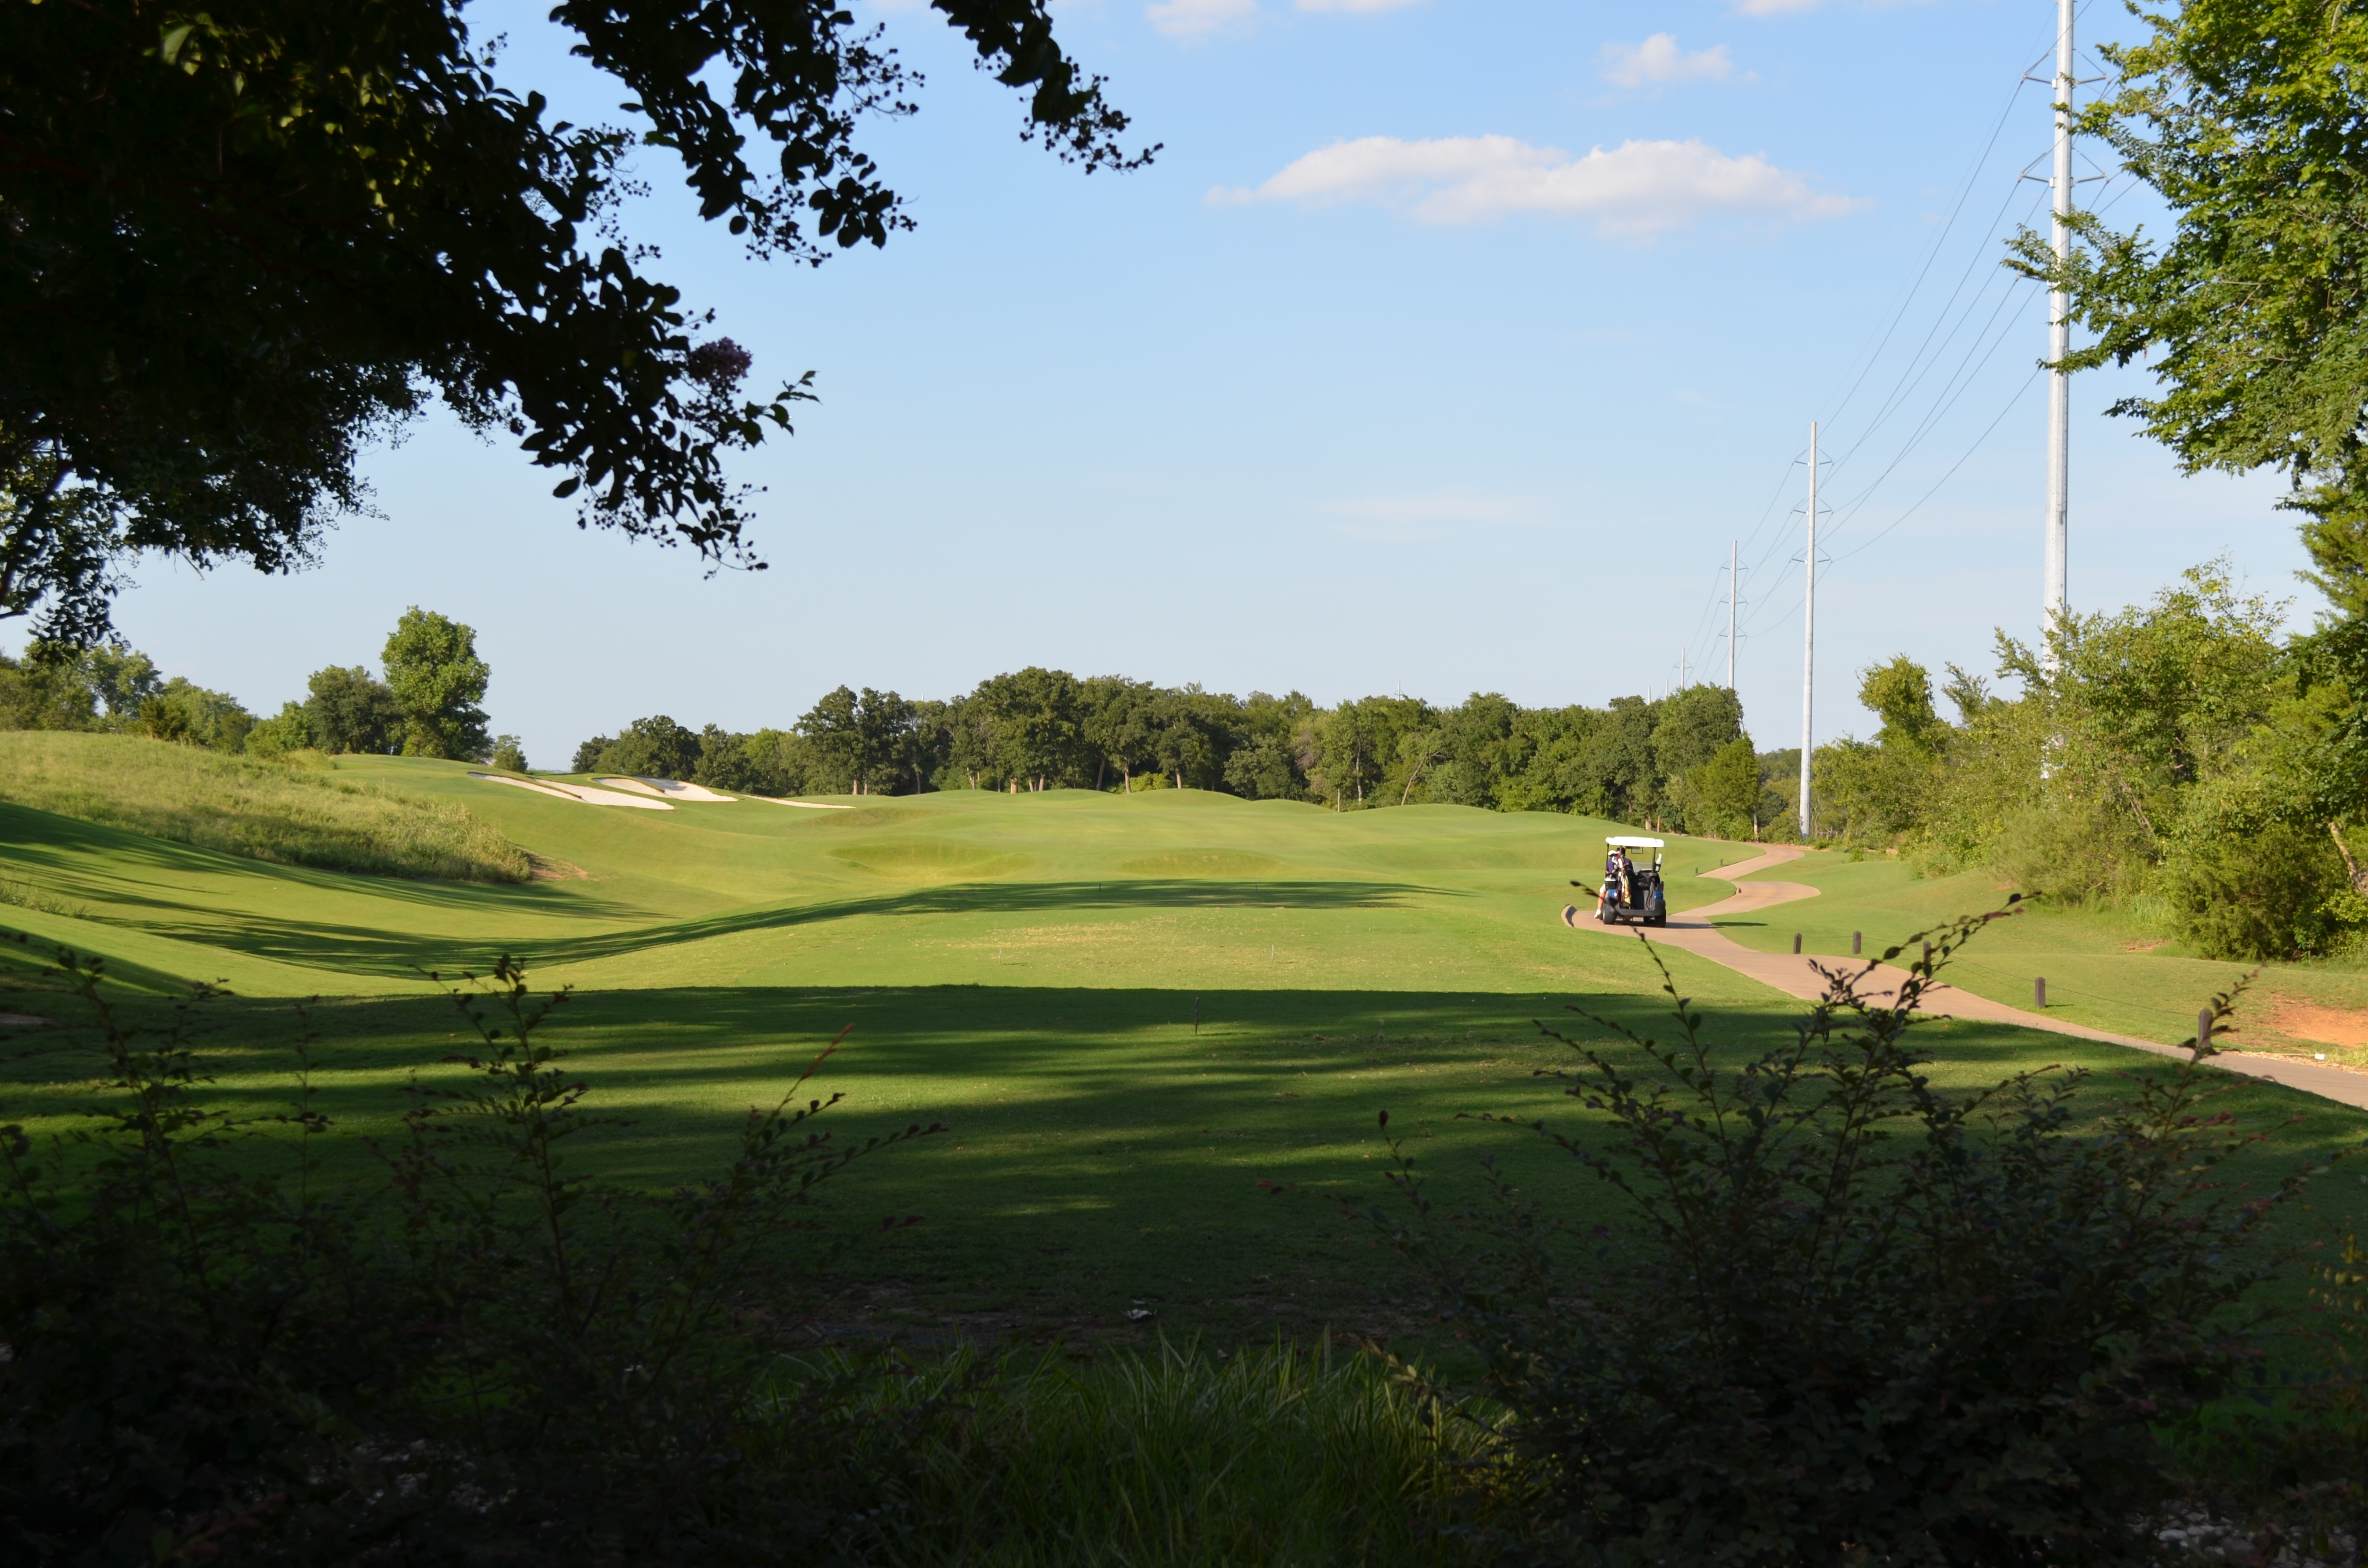 Waterchase Golf Club attraction reviews - Waterchase Golf Club tickets - Waterchase  Golf Club discounts - Waterchase Golf Club transportation, address, opening  hours - attractions, hotels, and food near Waterchase Golf Club 